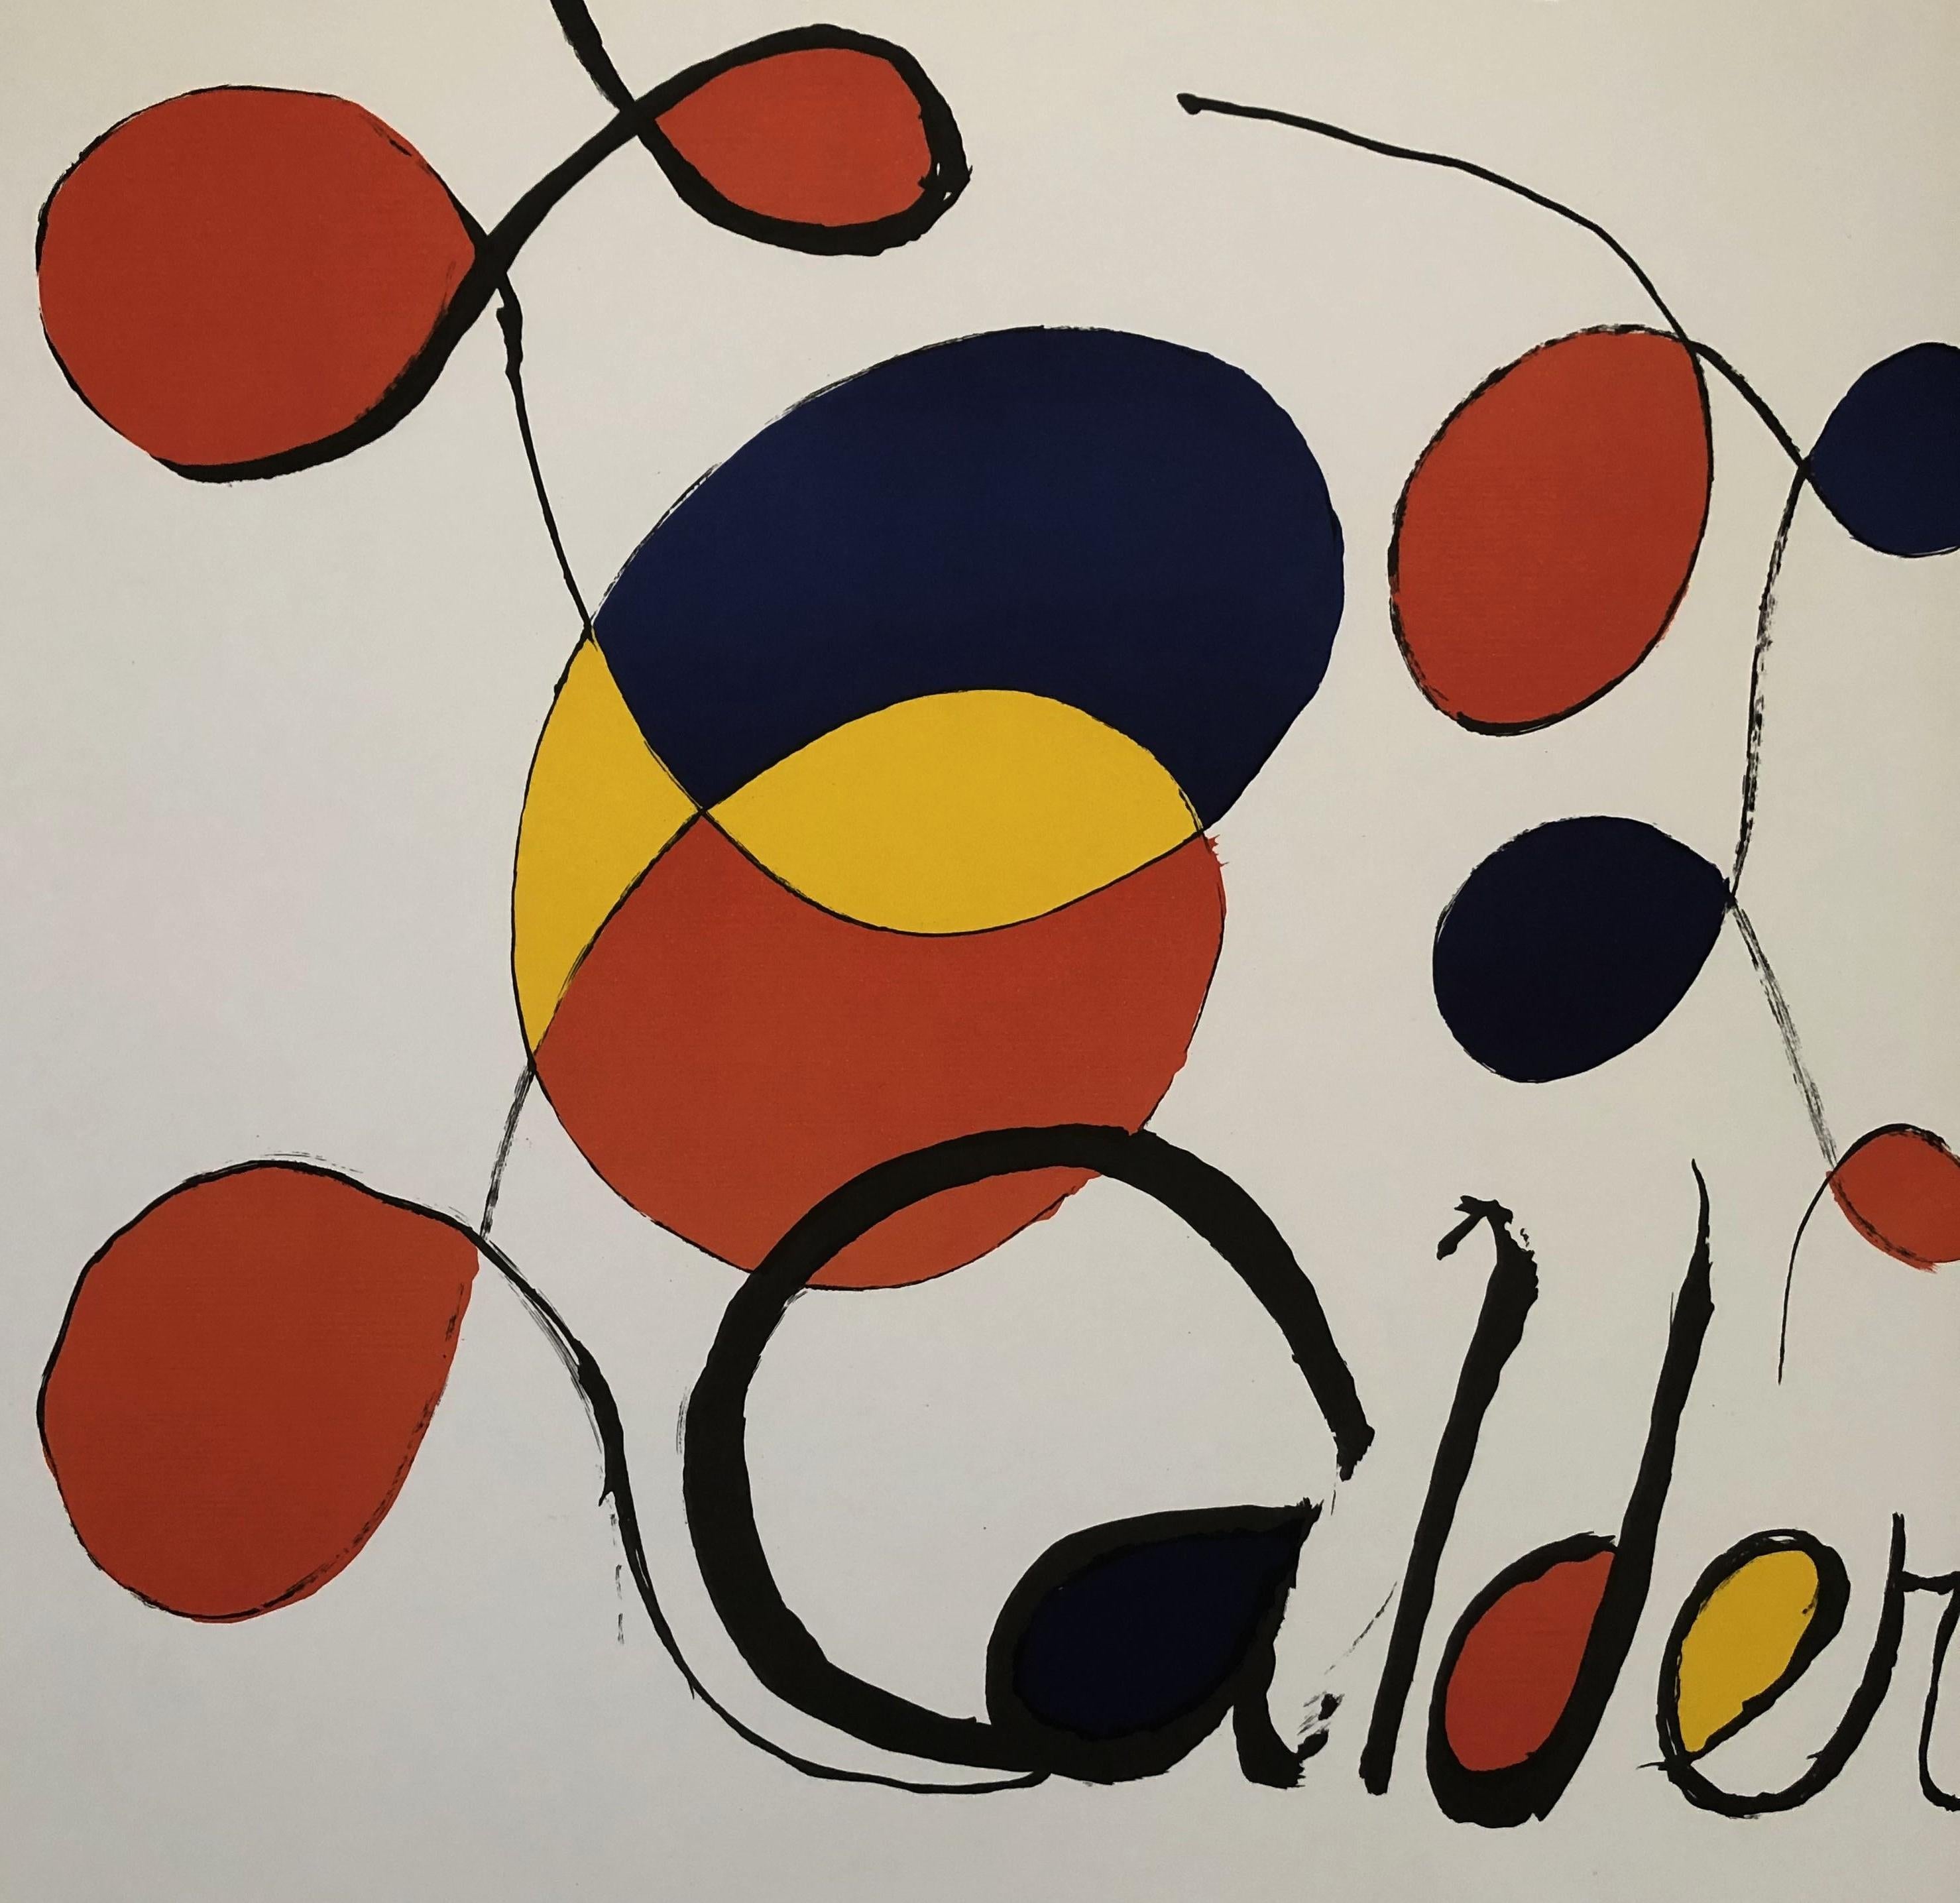 Alexander CALDER
Abstract Composition

Offset poster, 1971
Printed signature
On thick paper, size 89 x 59 cm (c. 35 x 23,2 in)
Mint condition
Published by Maeght

NOTE : Poster created for the Calder exhibition in Albi during summer 1971
